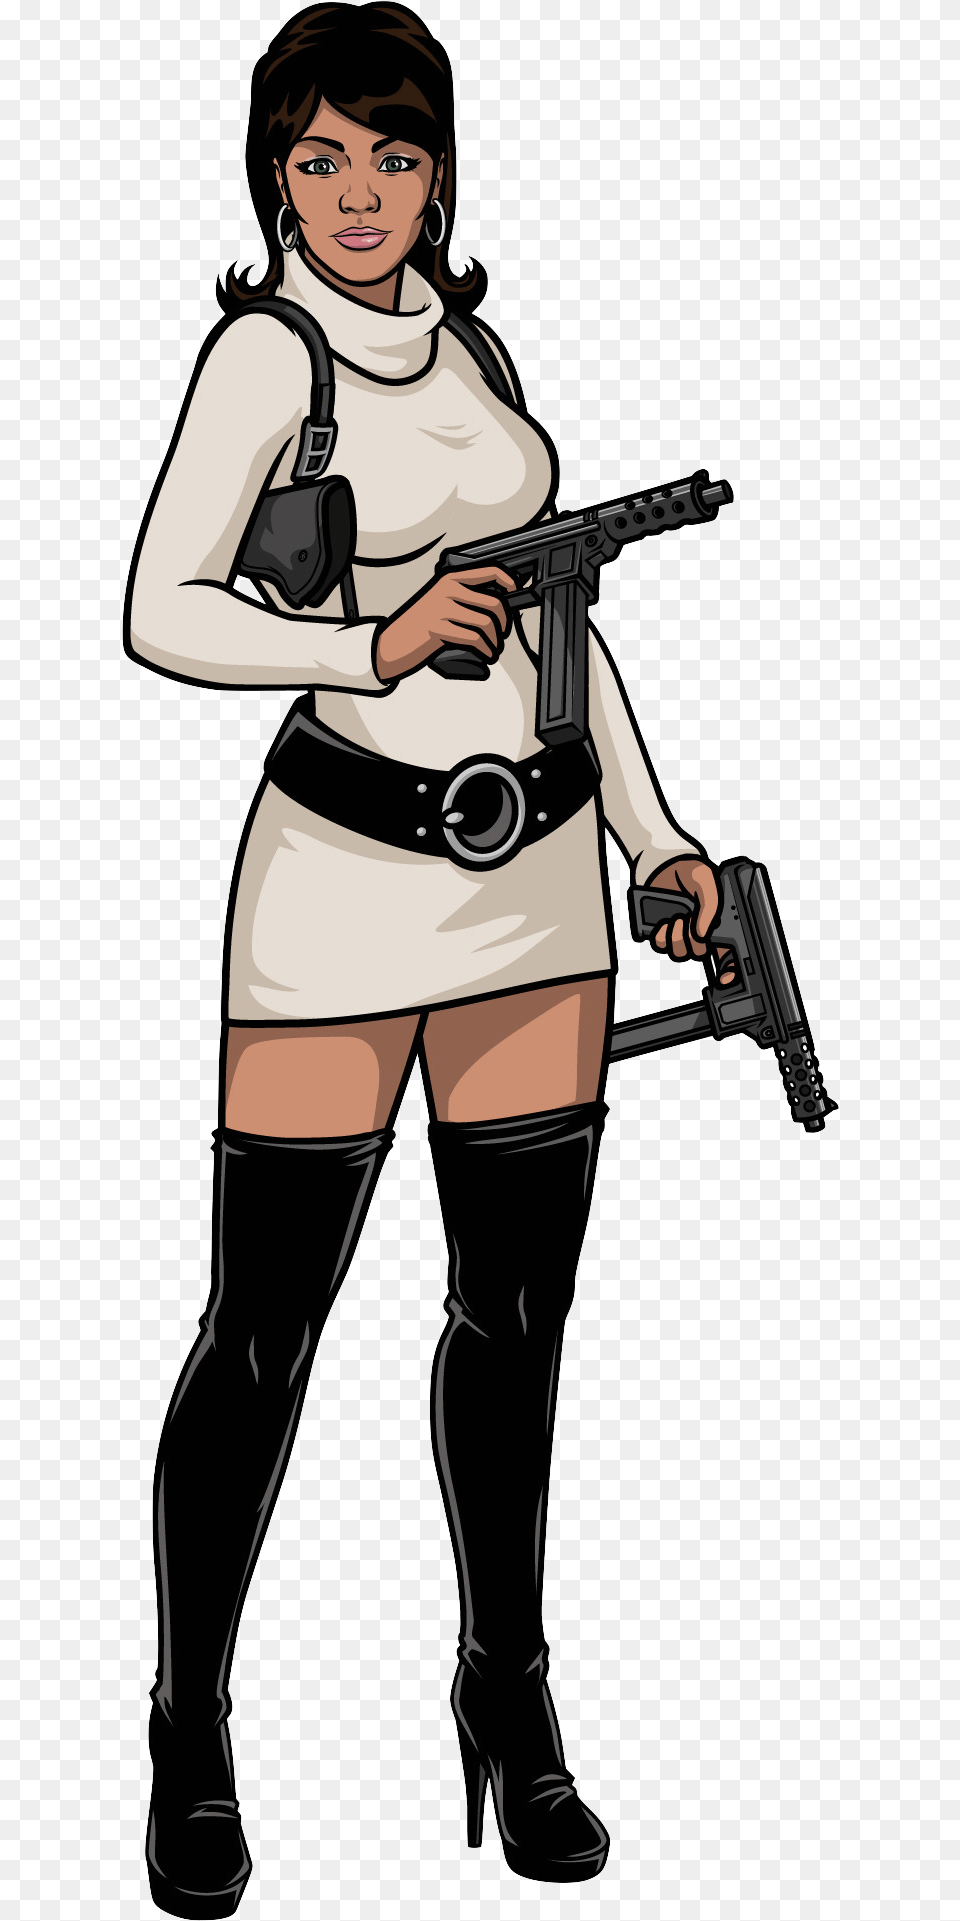 Lana Kane Archer And Lana Costume, Comics, Book, Publication, Person Png Image